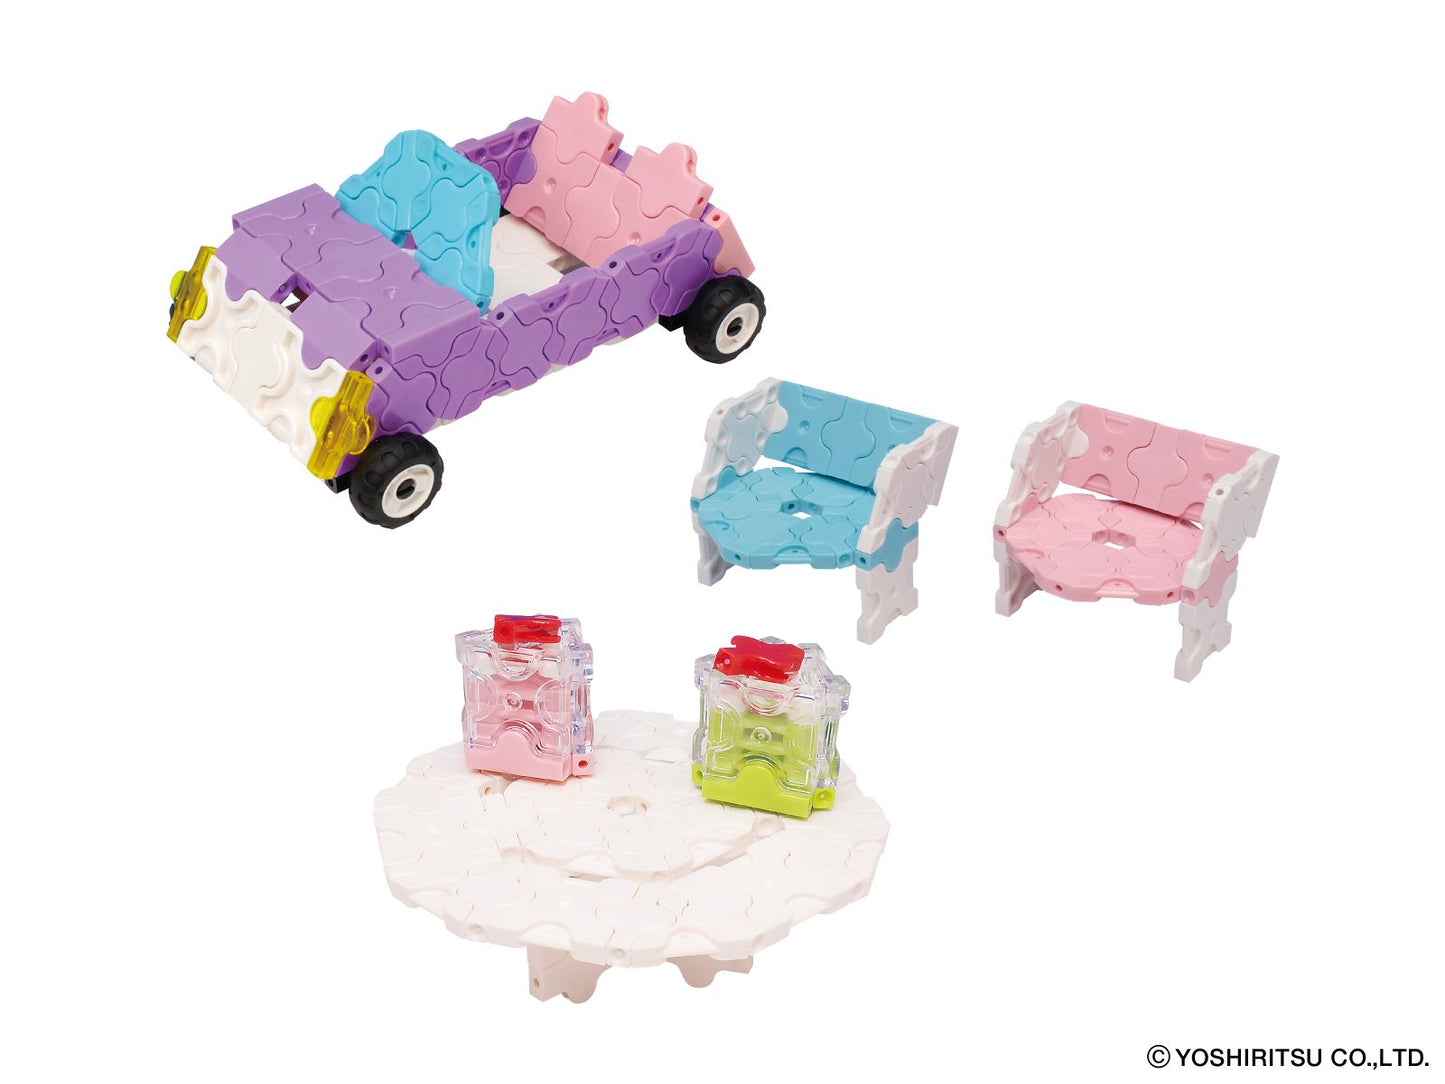 LaQ SWEET COLLECTION ICE CREAM WAGON - 14 MODELS, 365 PIECES